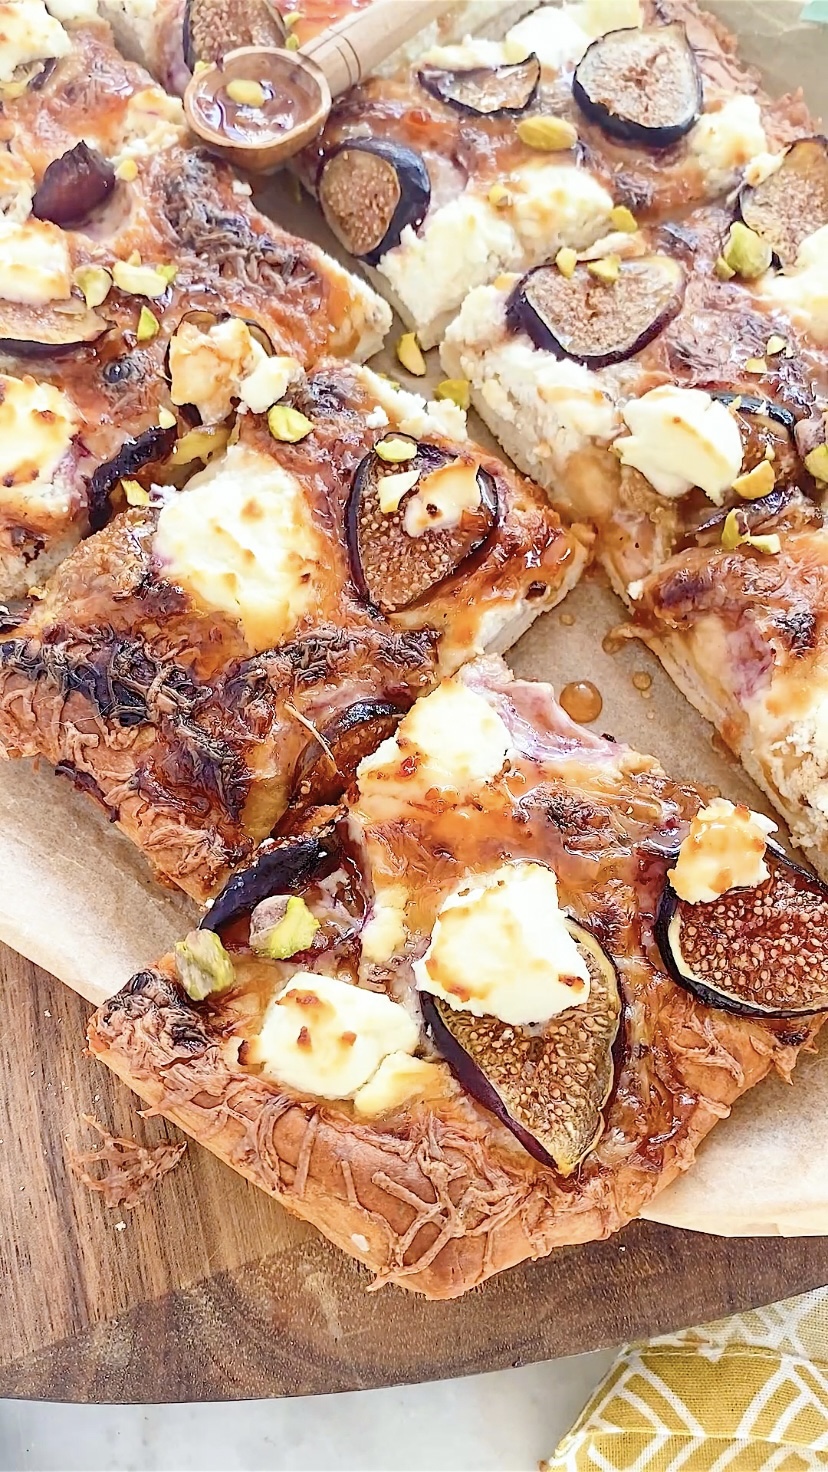 A pizza with figs and goat cheese.